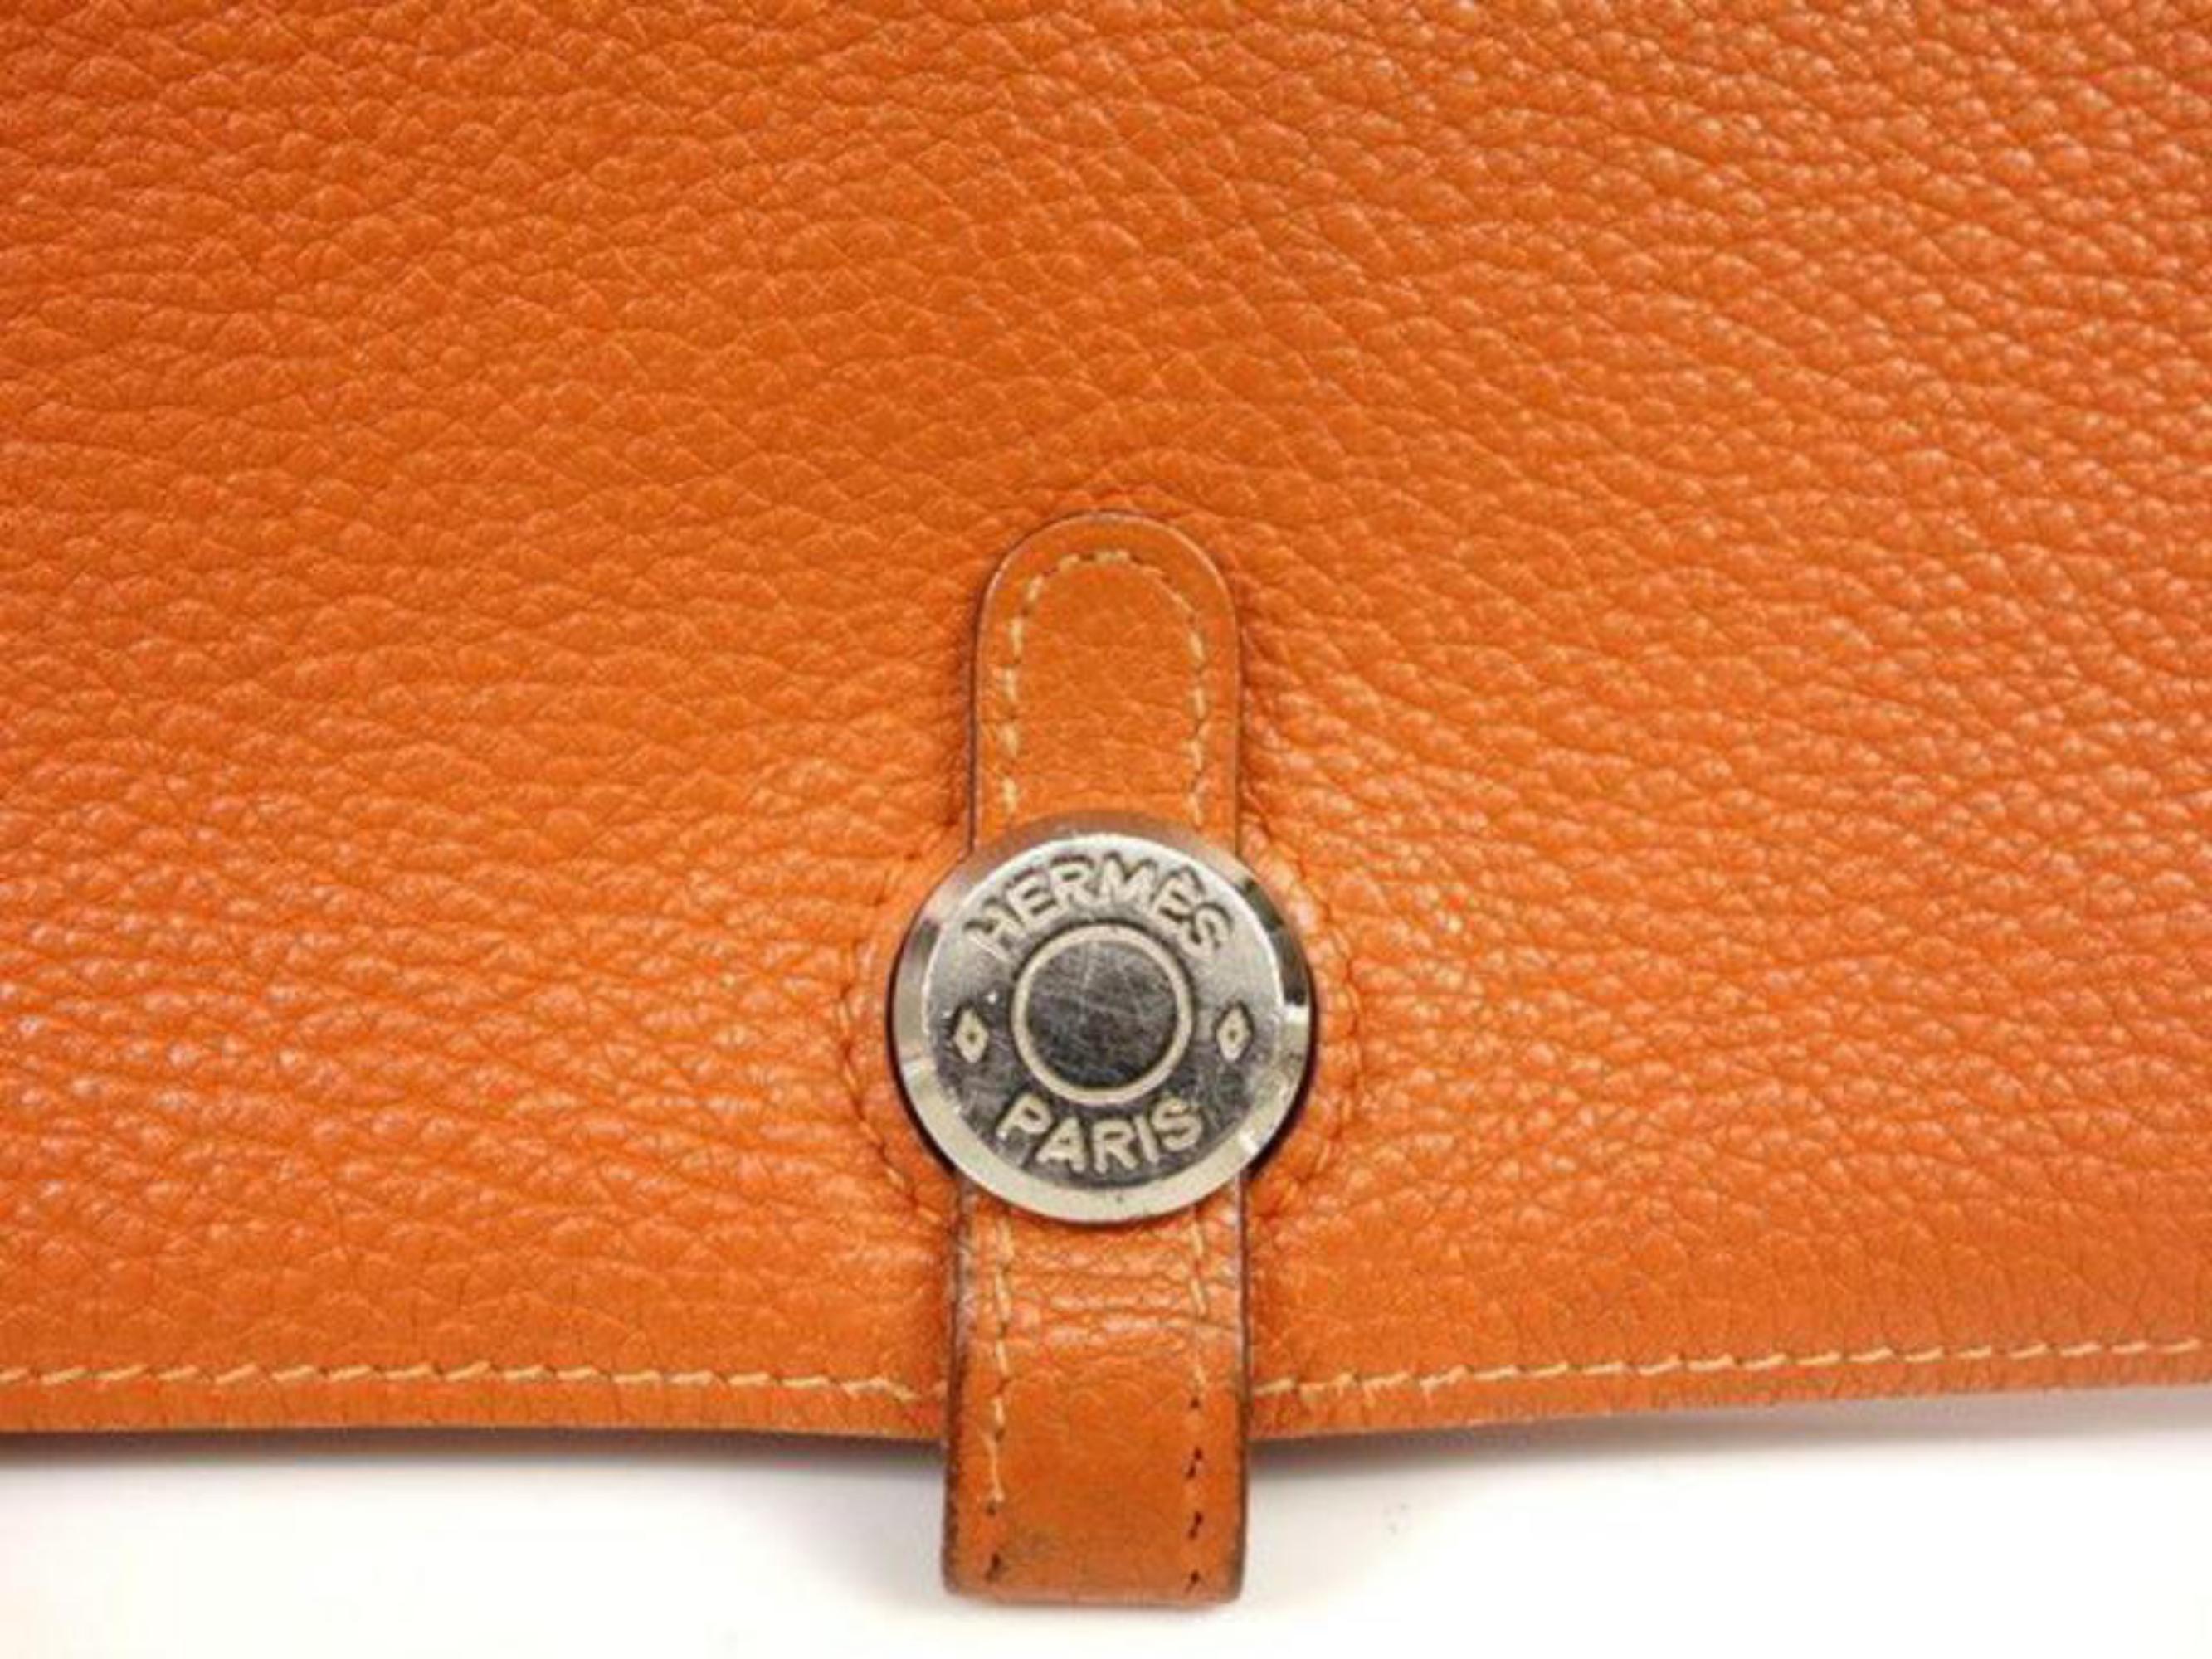 Hermès Orange Togo Leather Dogon Wallet 232H857 In Good Condition For Sale In Dix hills, NY